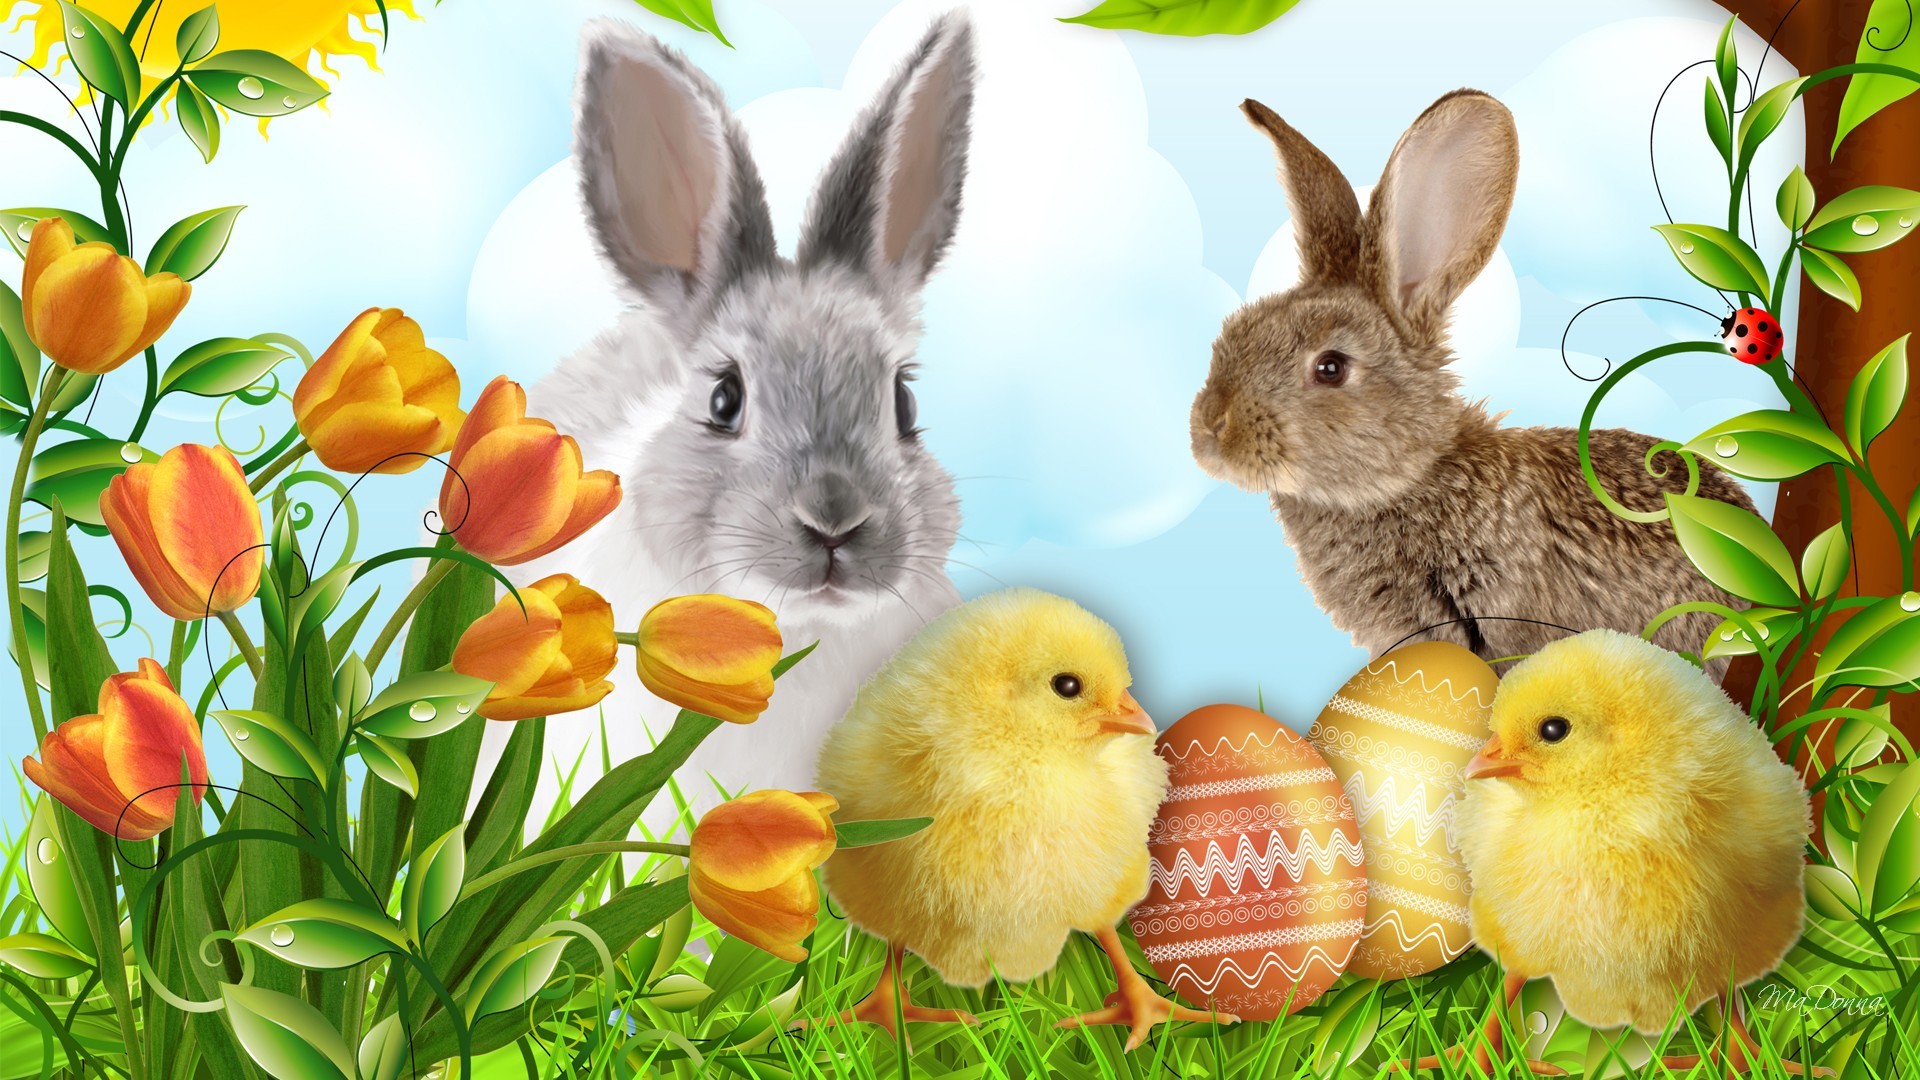 1920x1080 Happy Easter desktop hd wallpapers, hd images. Happy Easter cute bunny.